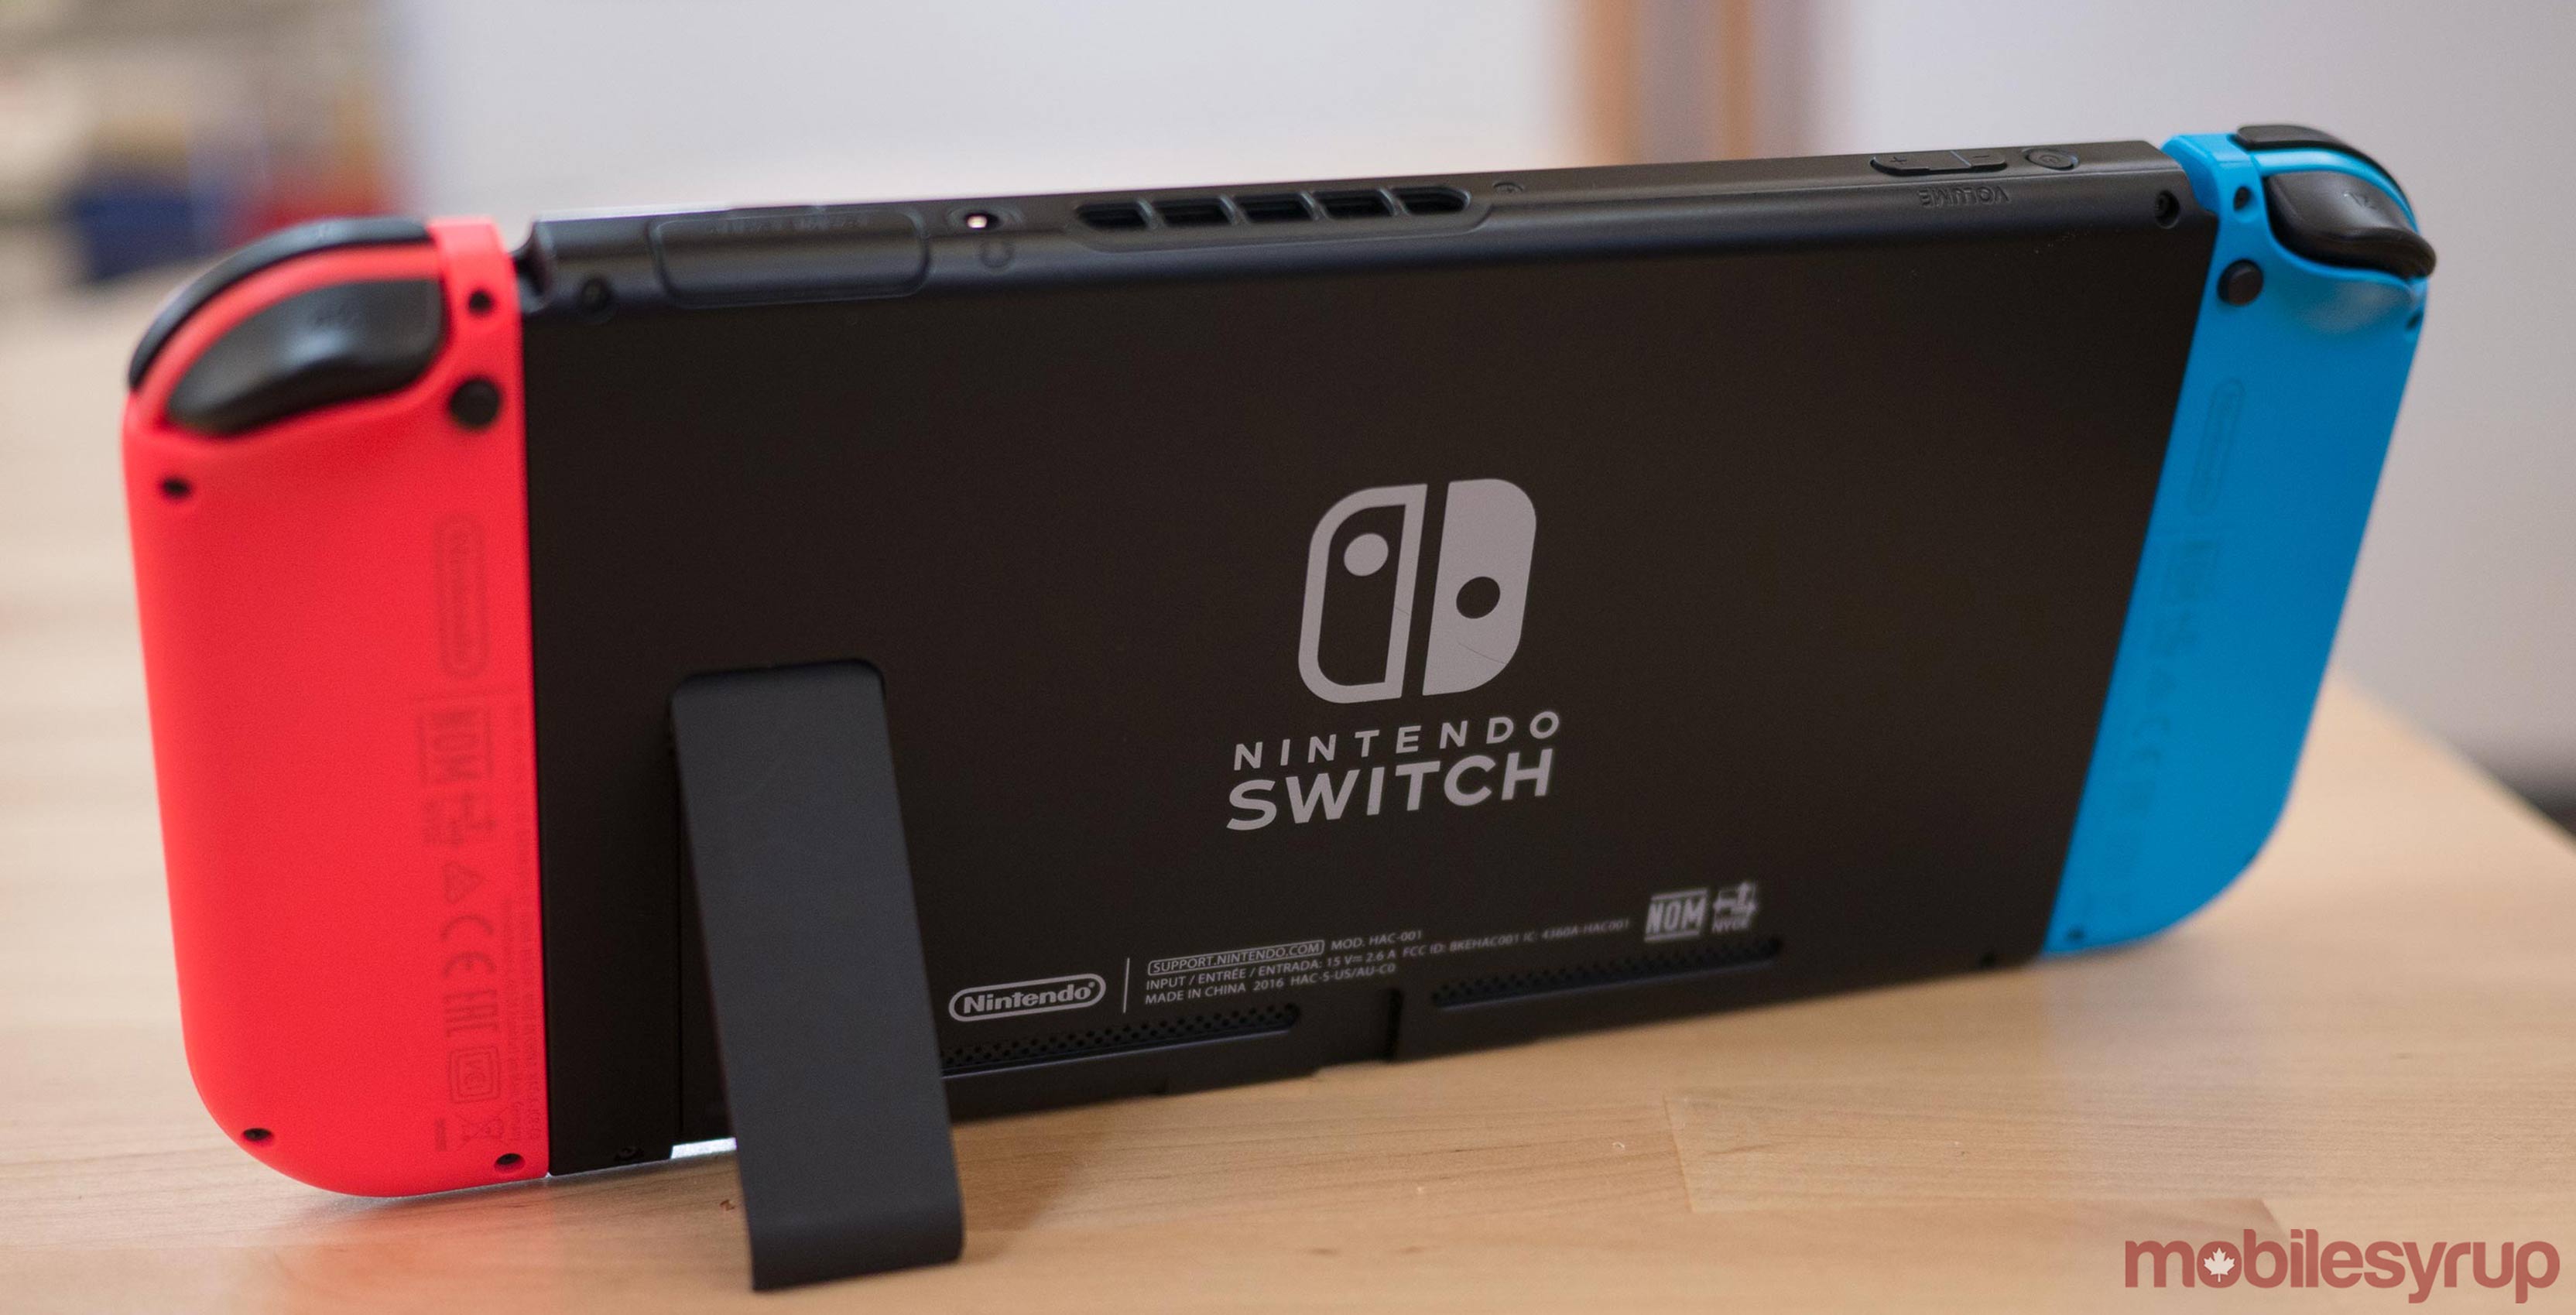 nintendo switch trade in for new model